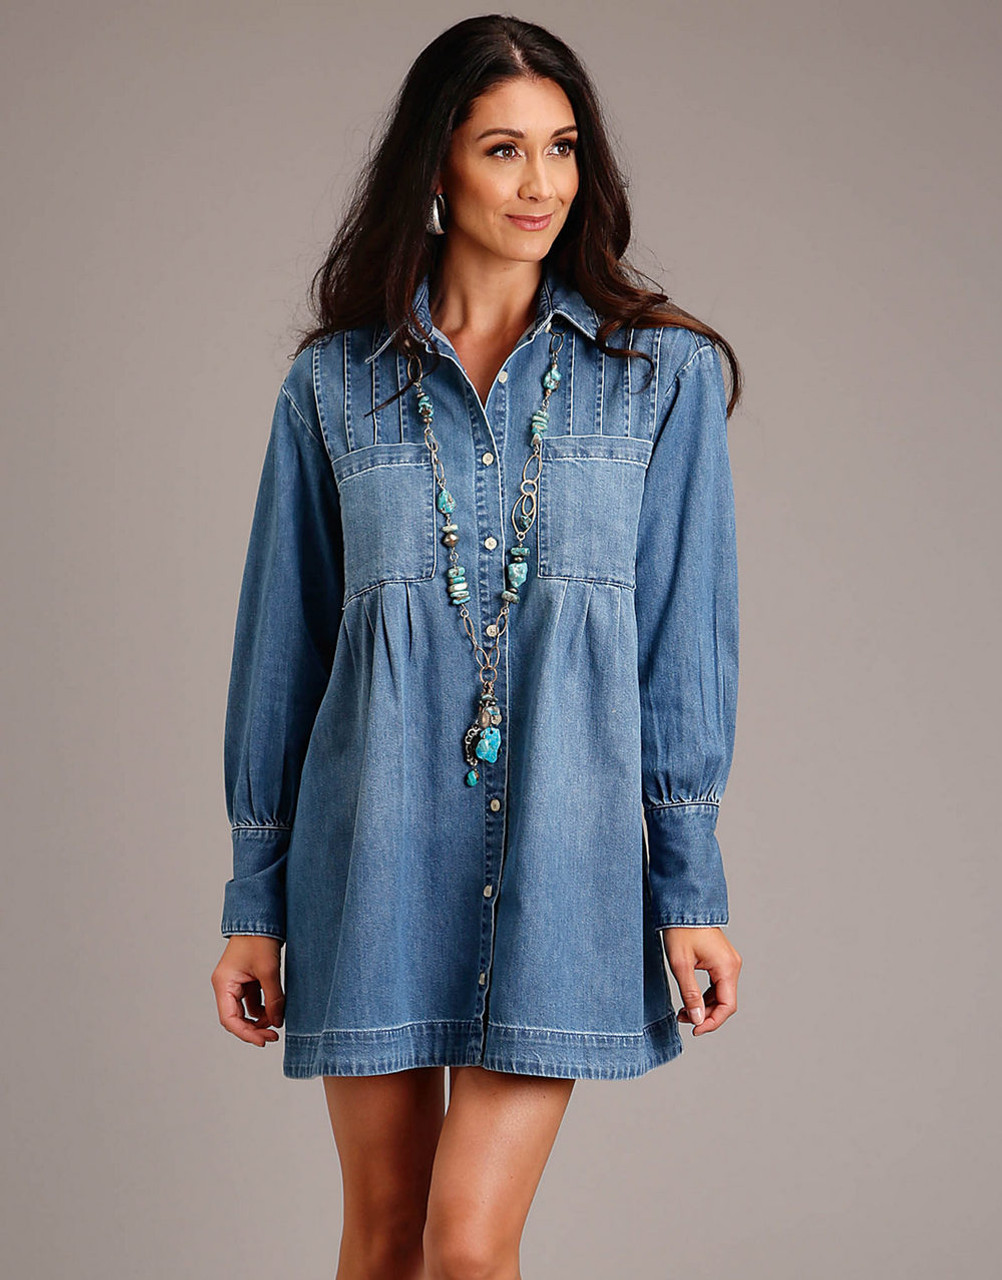 12 best denim shirts to embrace Cowgirl-Core | HELLO!